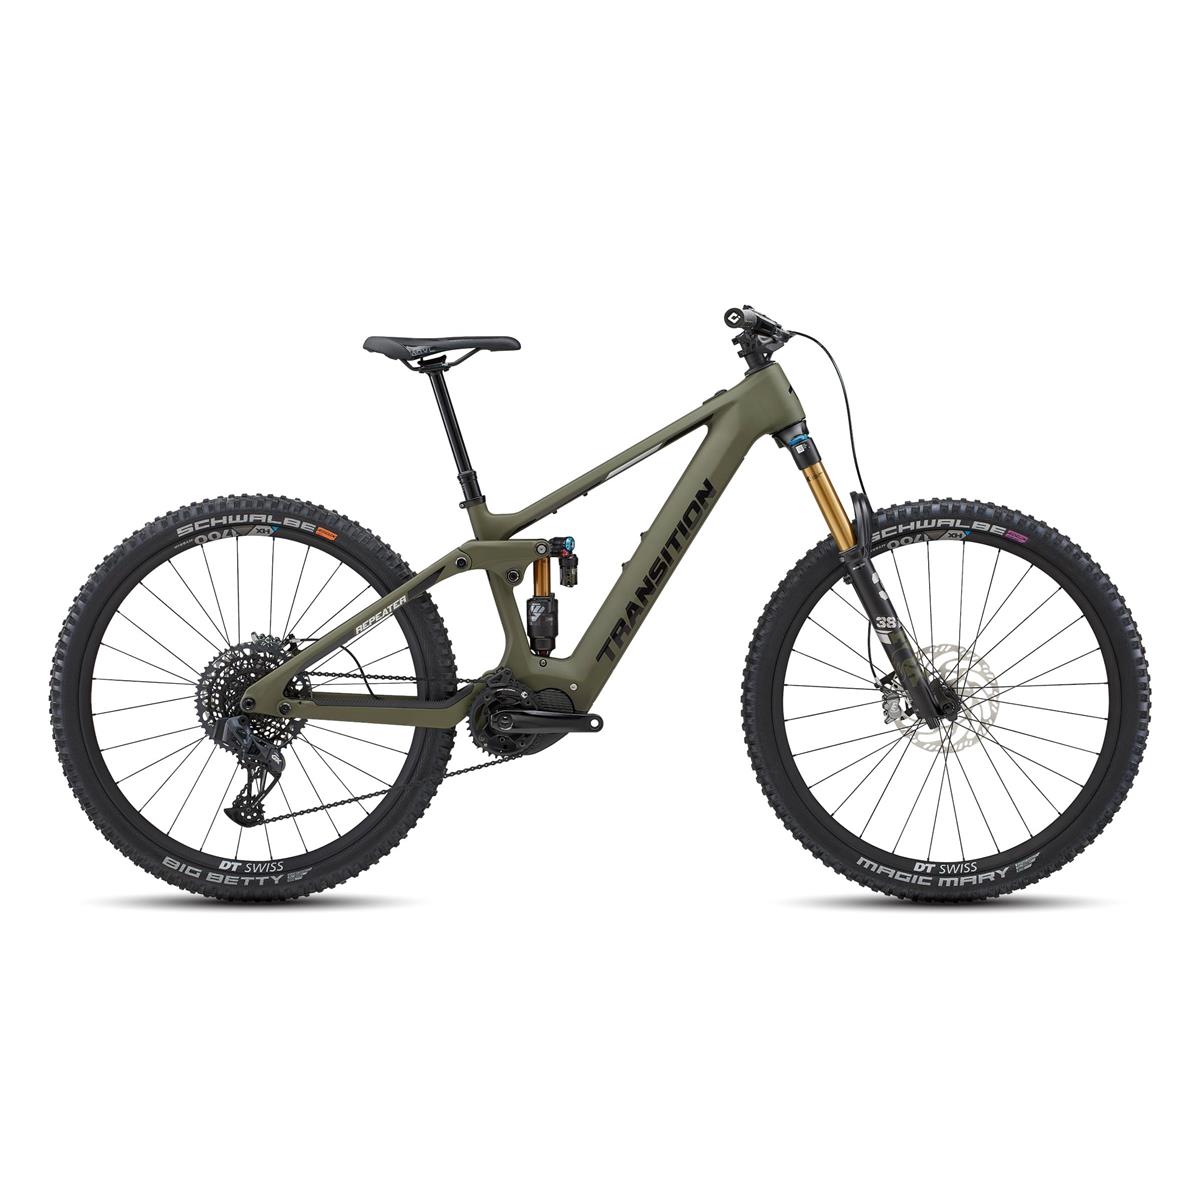 Repeater Carbon AXS 29'' 160mm 12s 630Wh Shimano EP8 Mossy Green Größe M